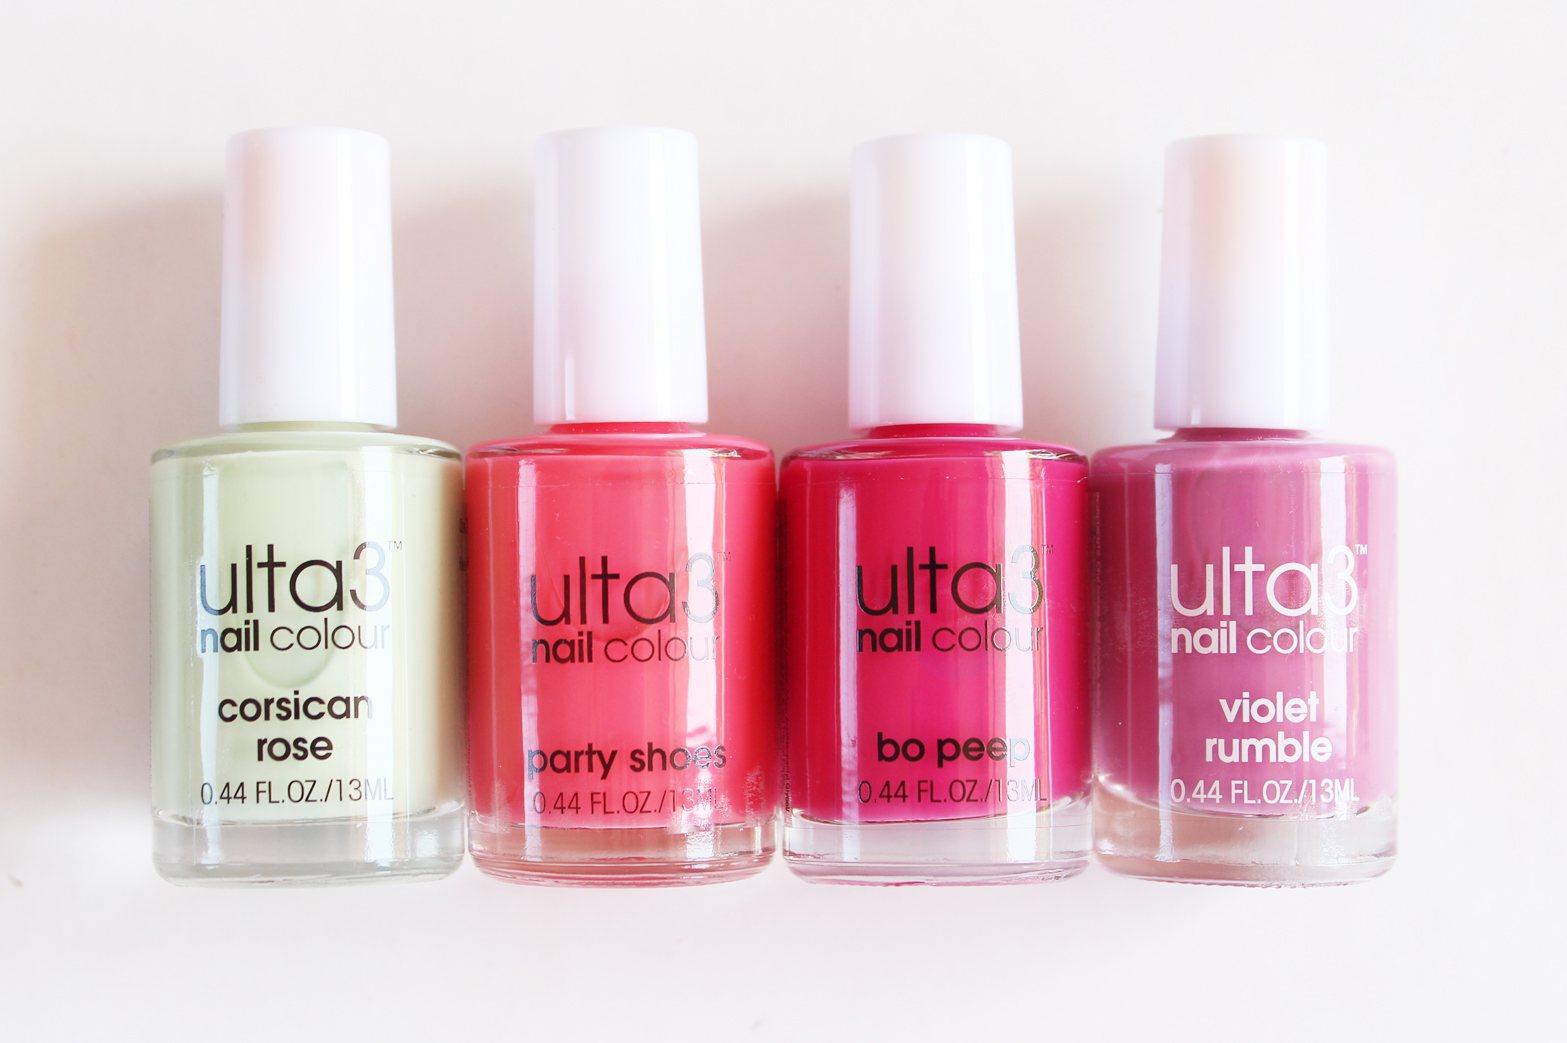 ULTA3 | Nail Polishes for Spring/Summer - Review + Swatches - CassandraMyee